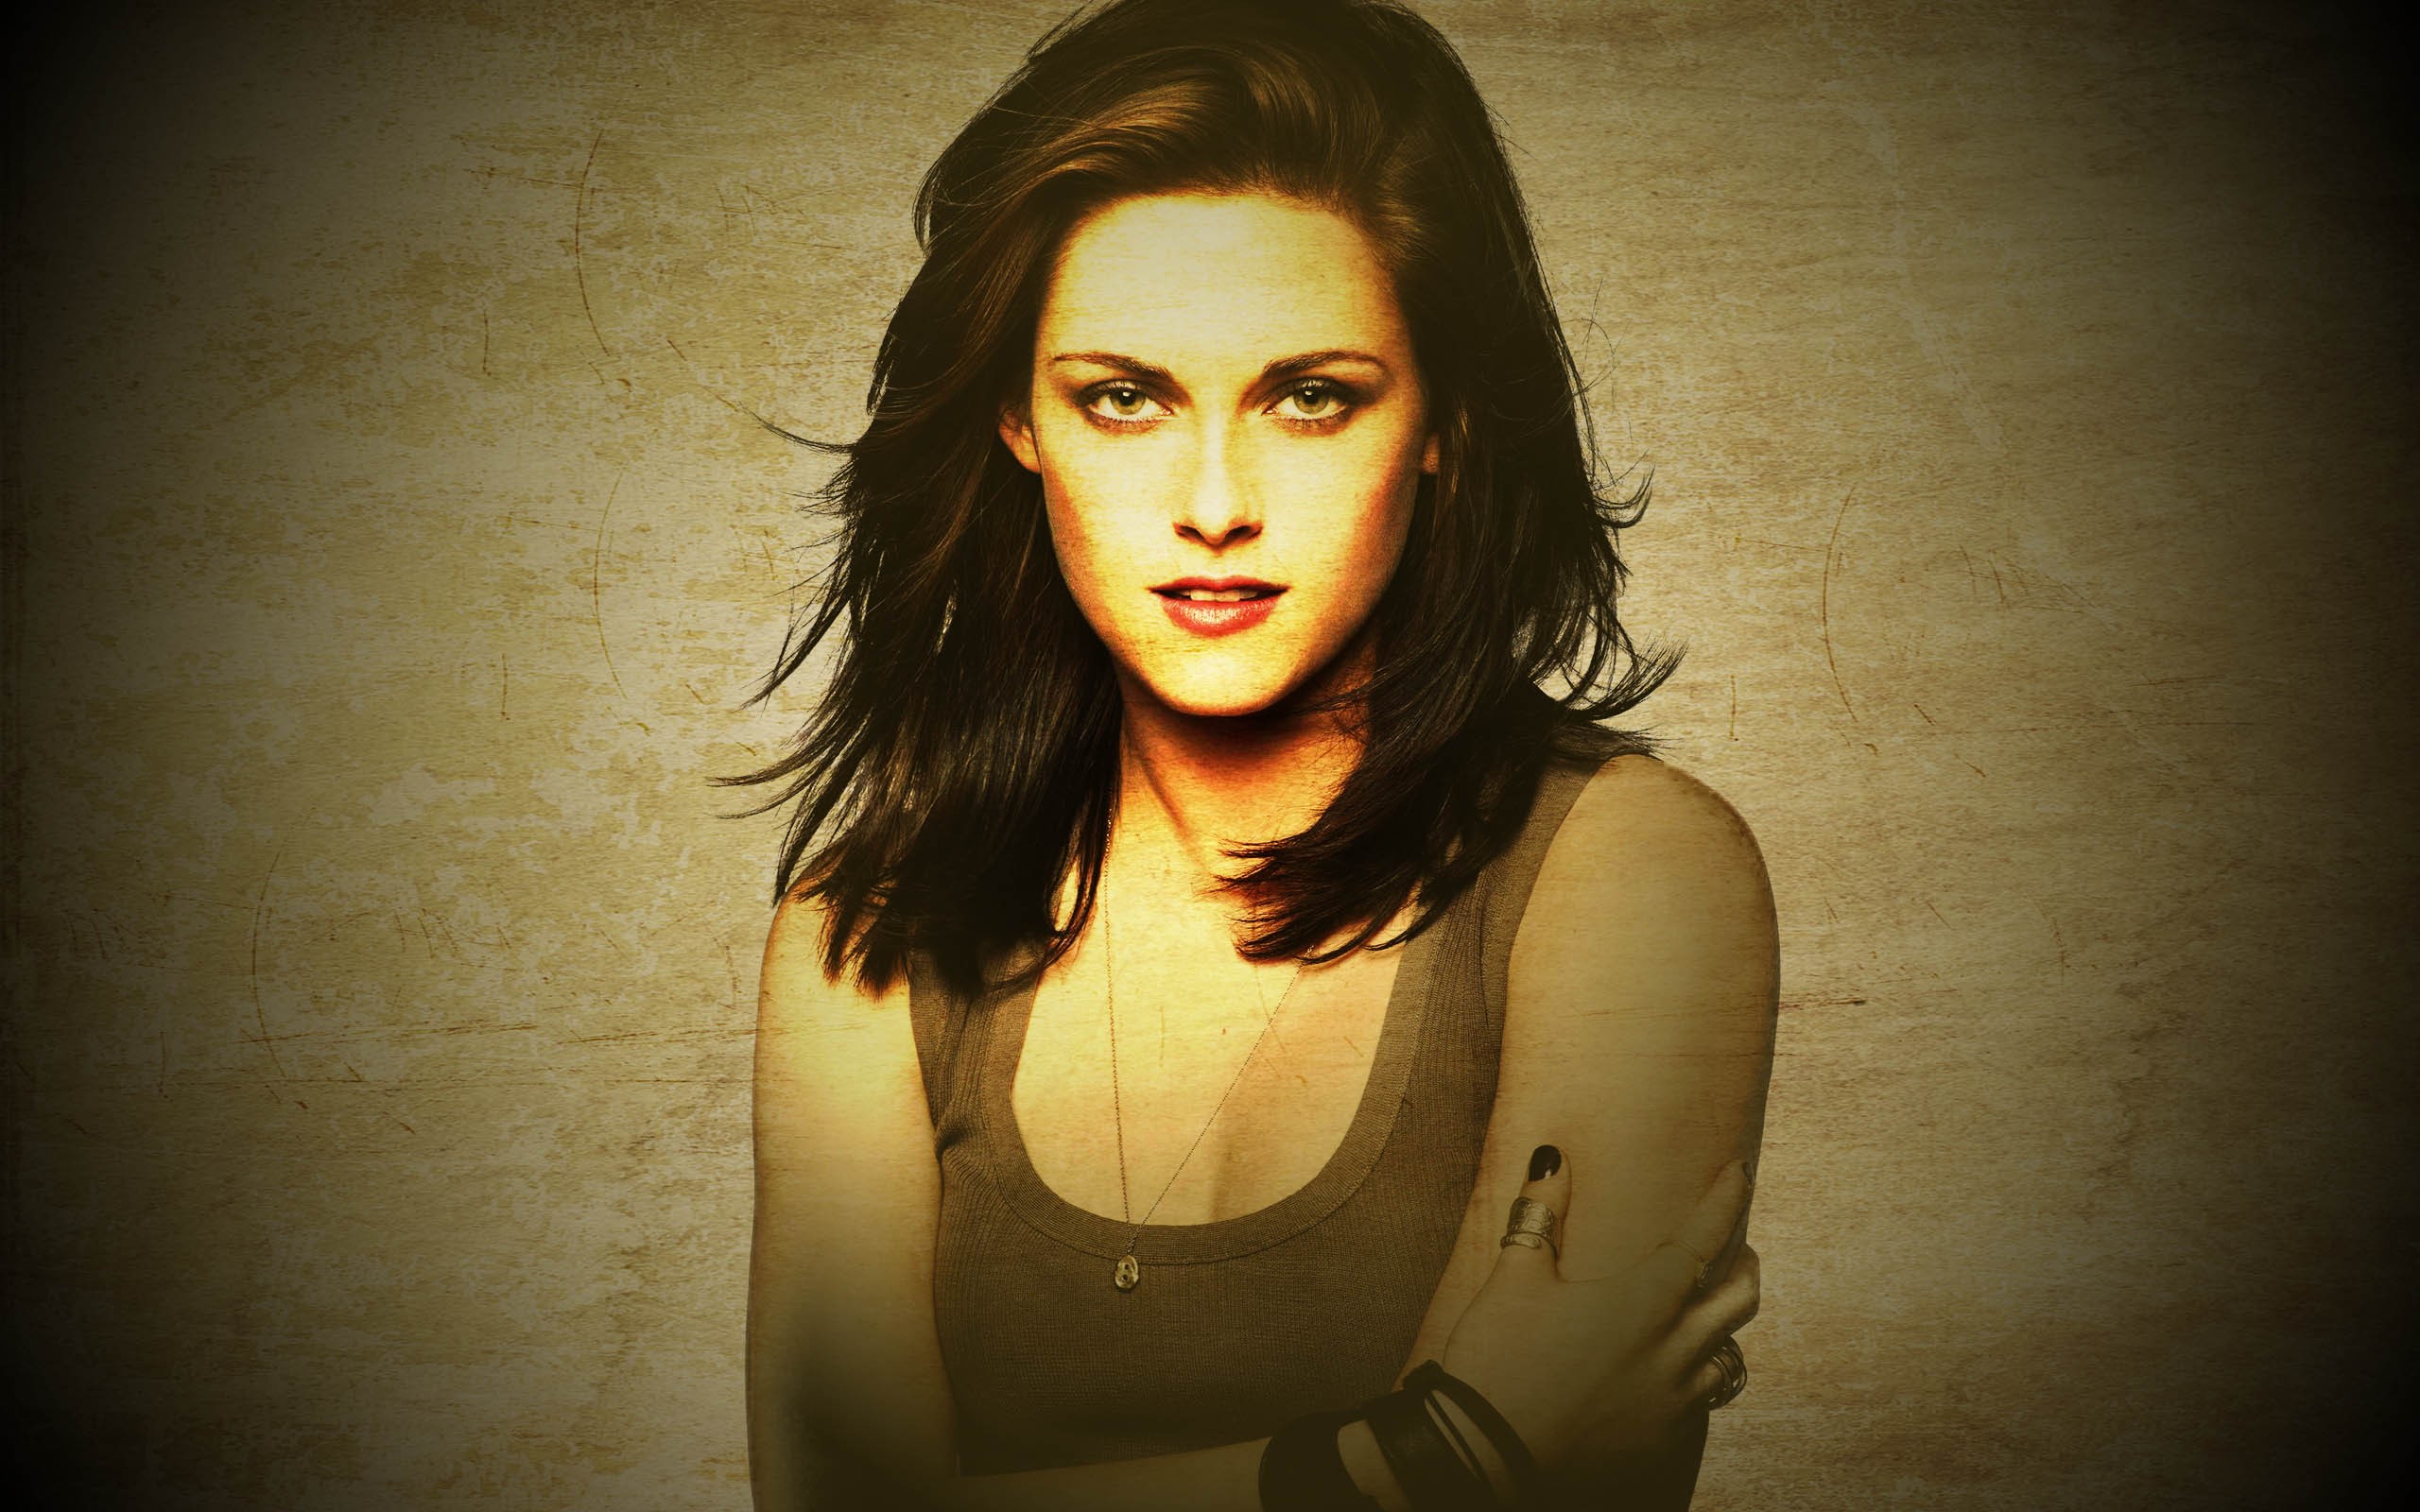 People 2560x1600 Kristen Stewart face women actress portrait celebrity looking at viewer photo manipulation necklace red lipstick brunette photoshopped simple background